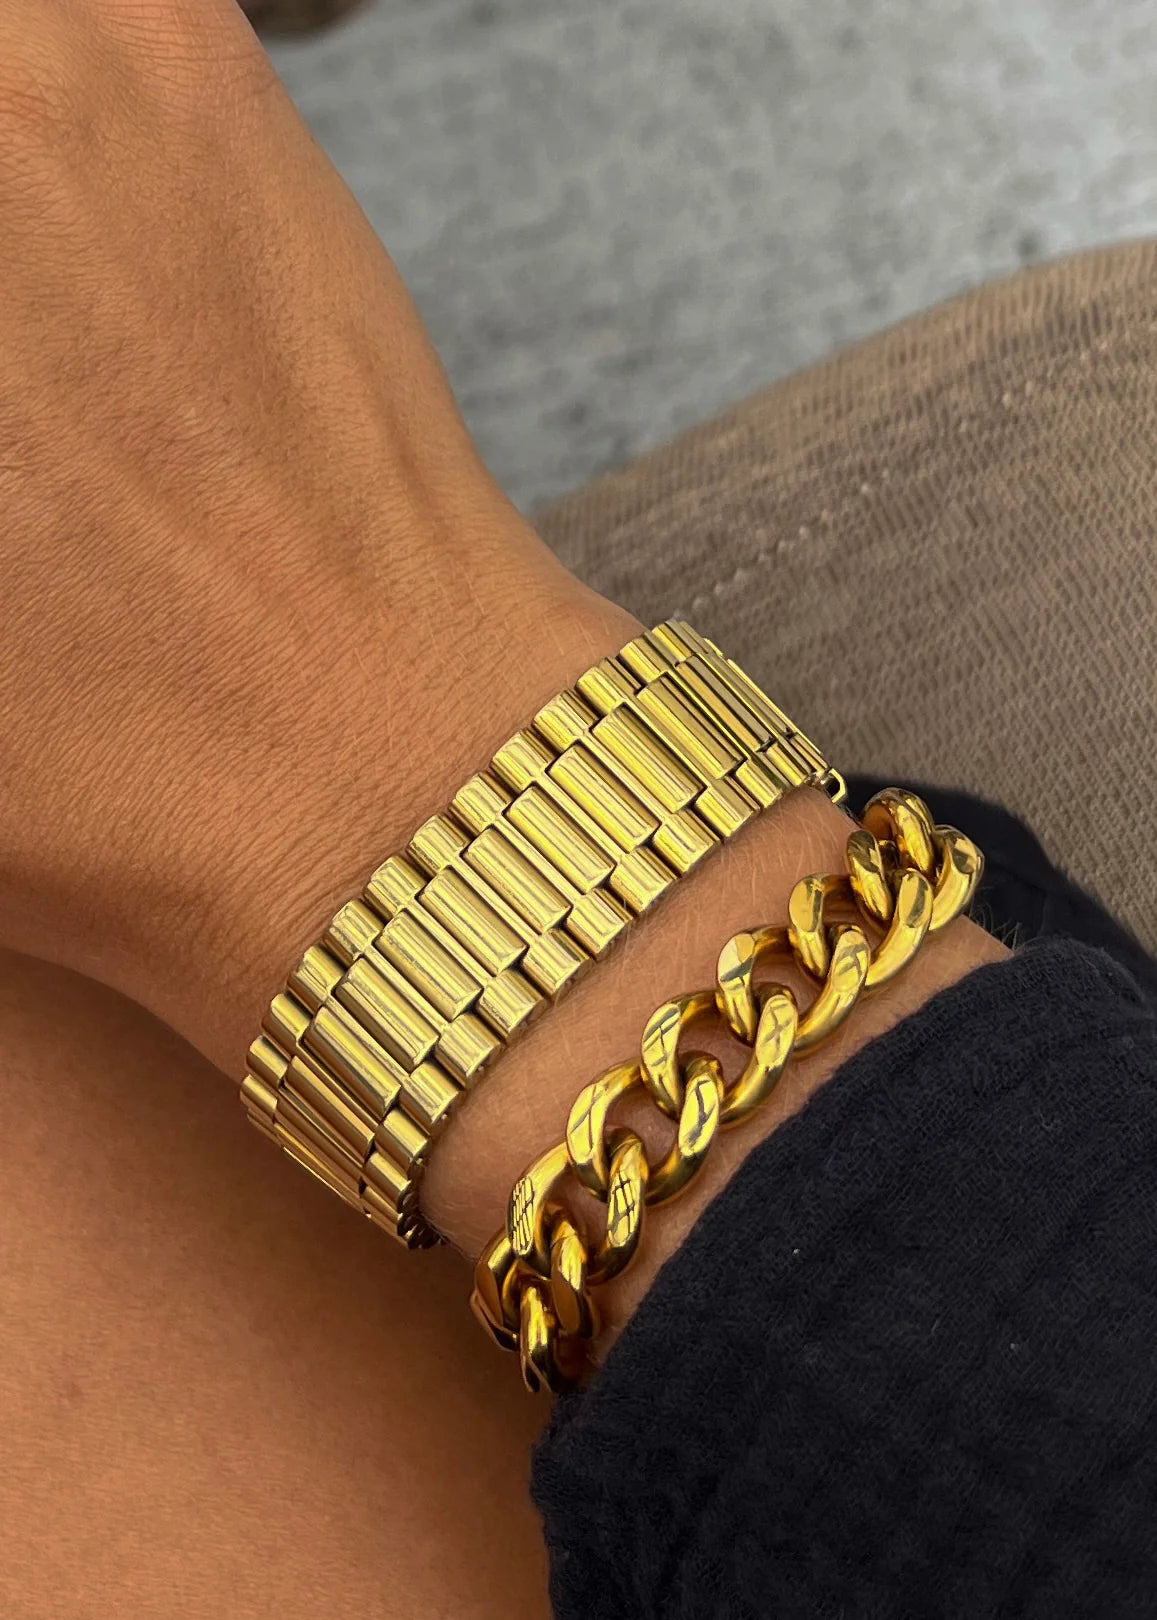 The Gold Thick Watch Band Bracelet